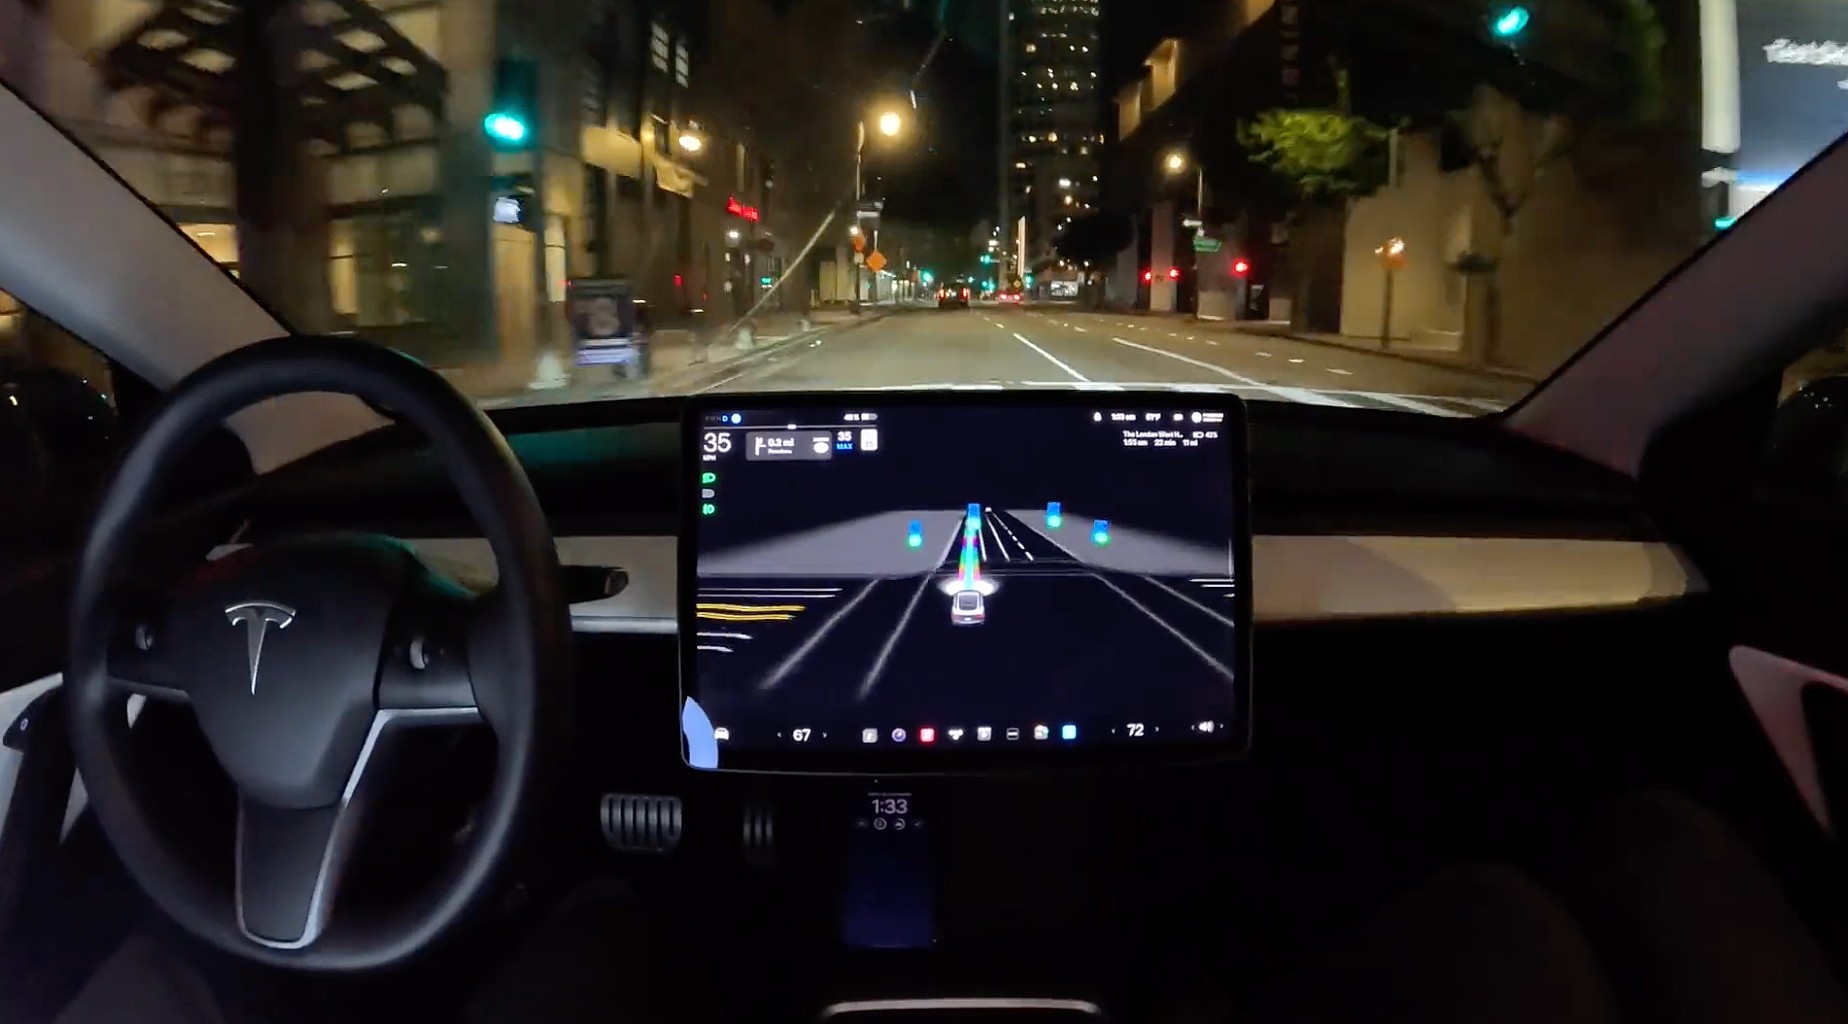 Elon Musk says Tesla Full Self-Driving v12 Alpha construct is ‘mind-blowing’